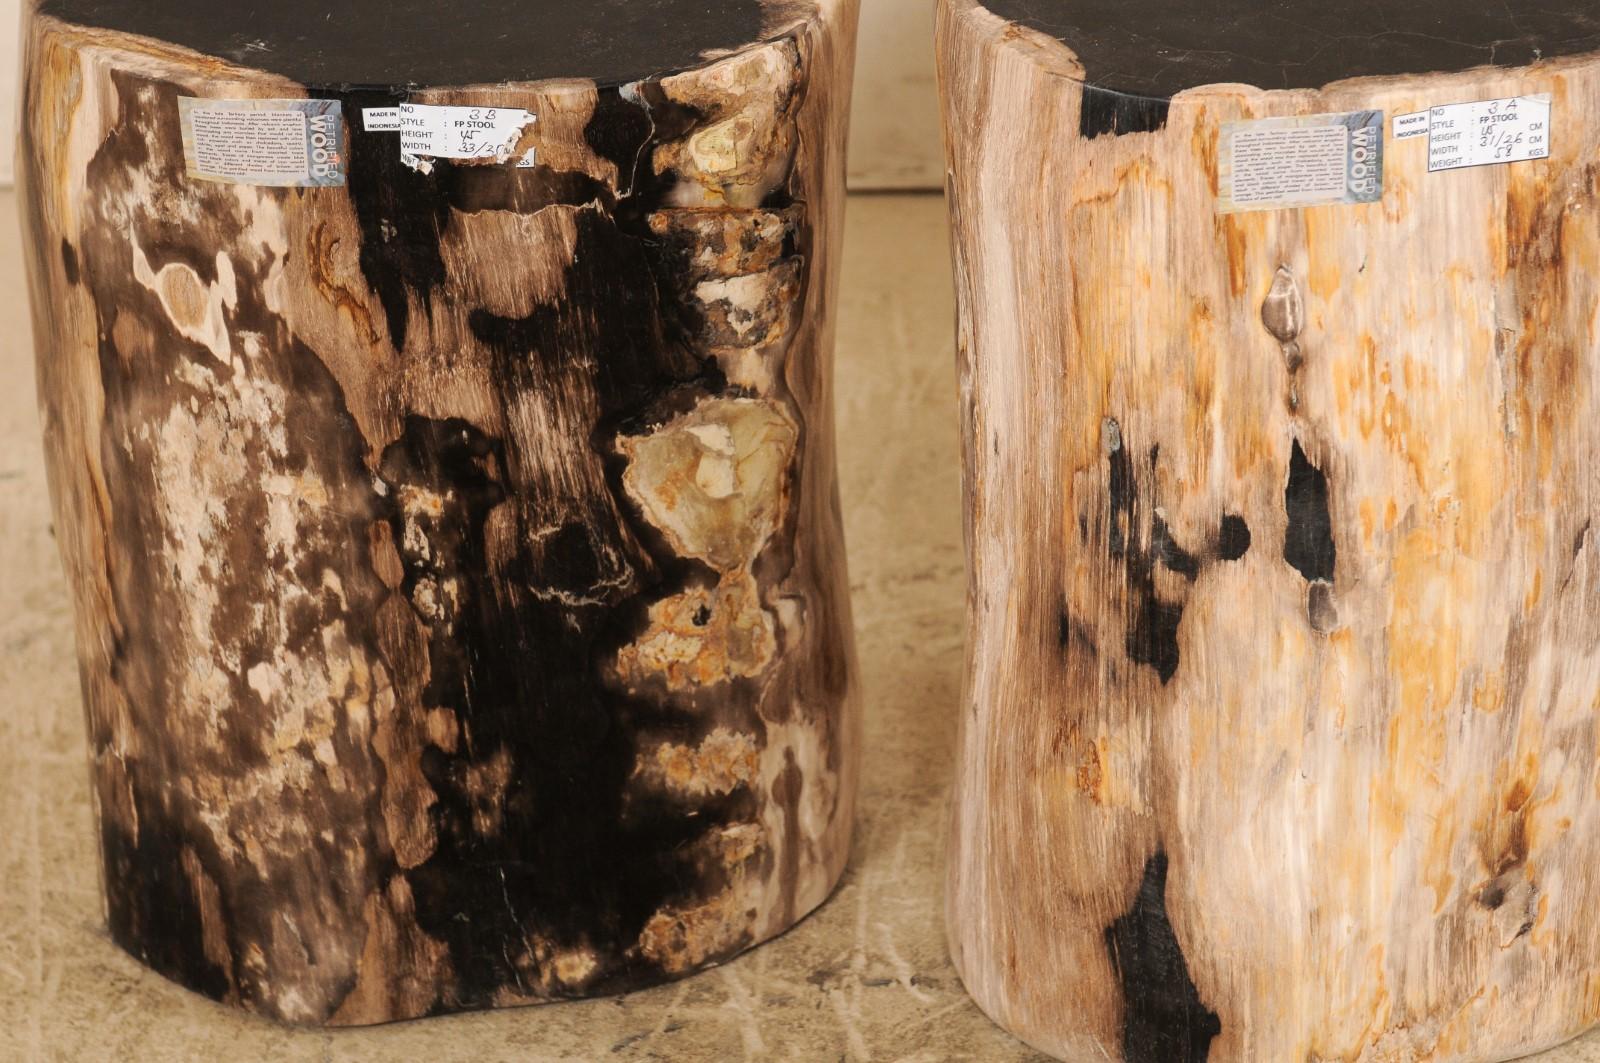 Pair of Polished Petrified Wood Side Tables or Stools in Cream and Black 1